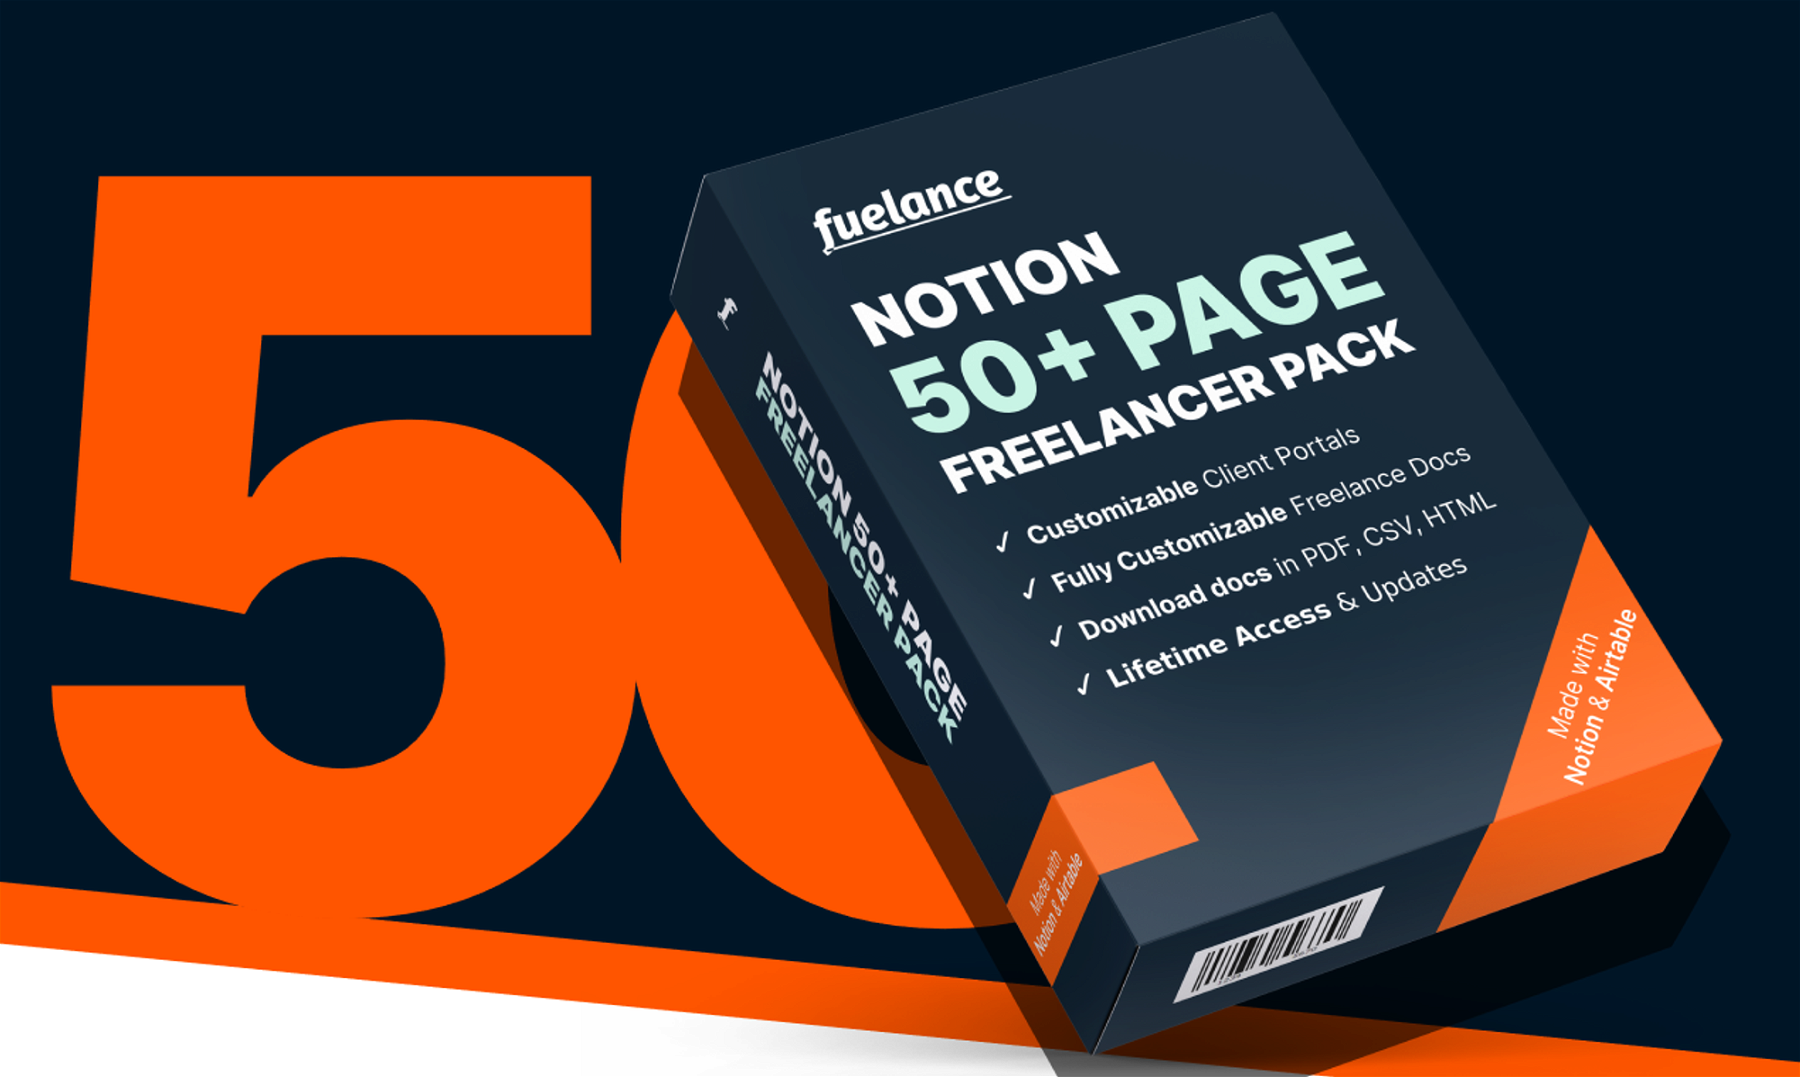 Notion 50+ Page Freelancer Pack, Project Portal & Client Dashboard